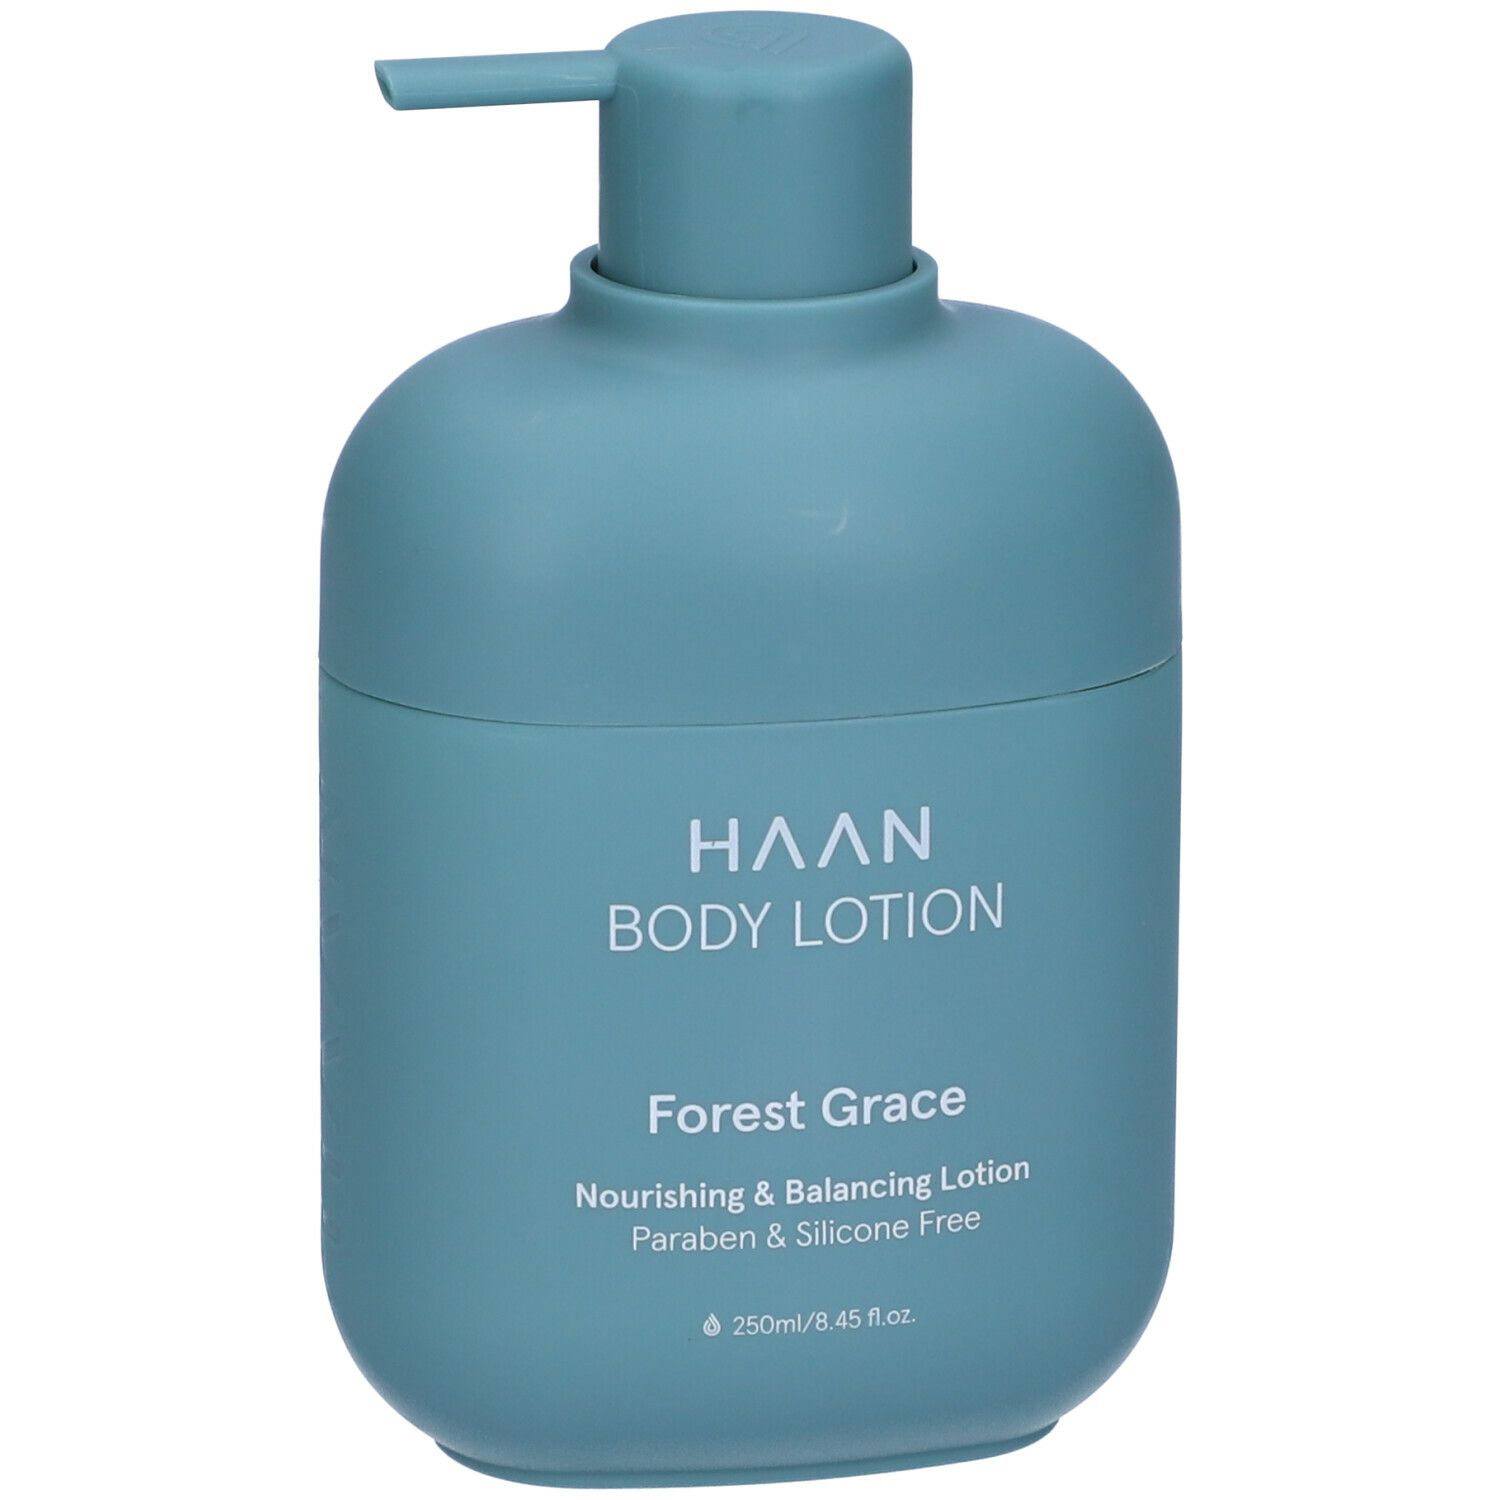 HAAN, Forest Grace Body Lotion